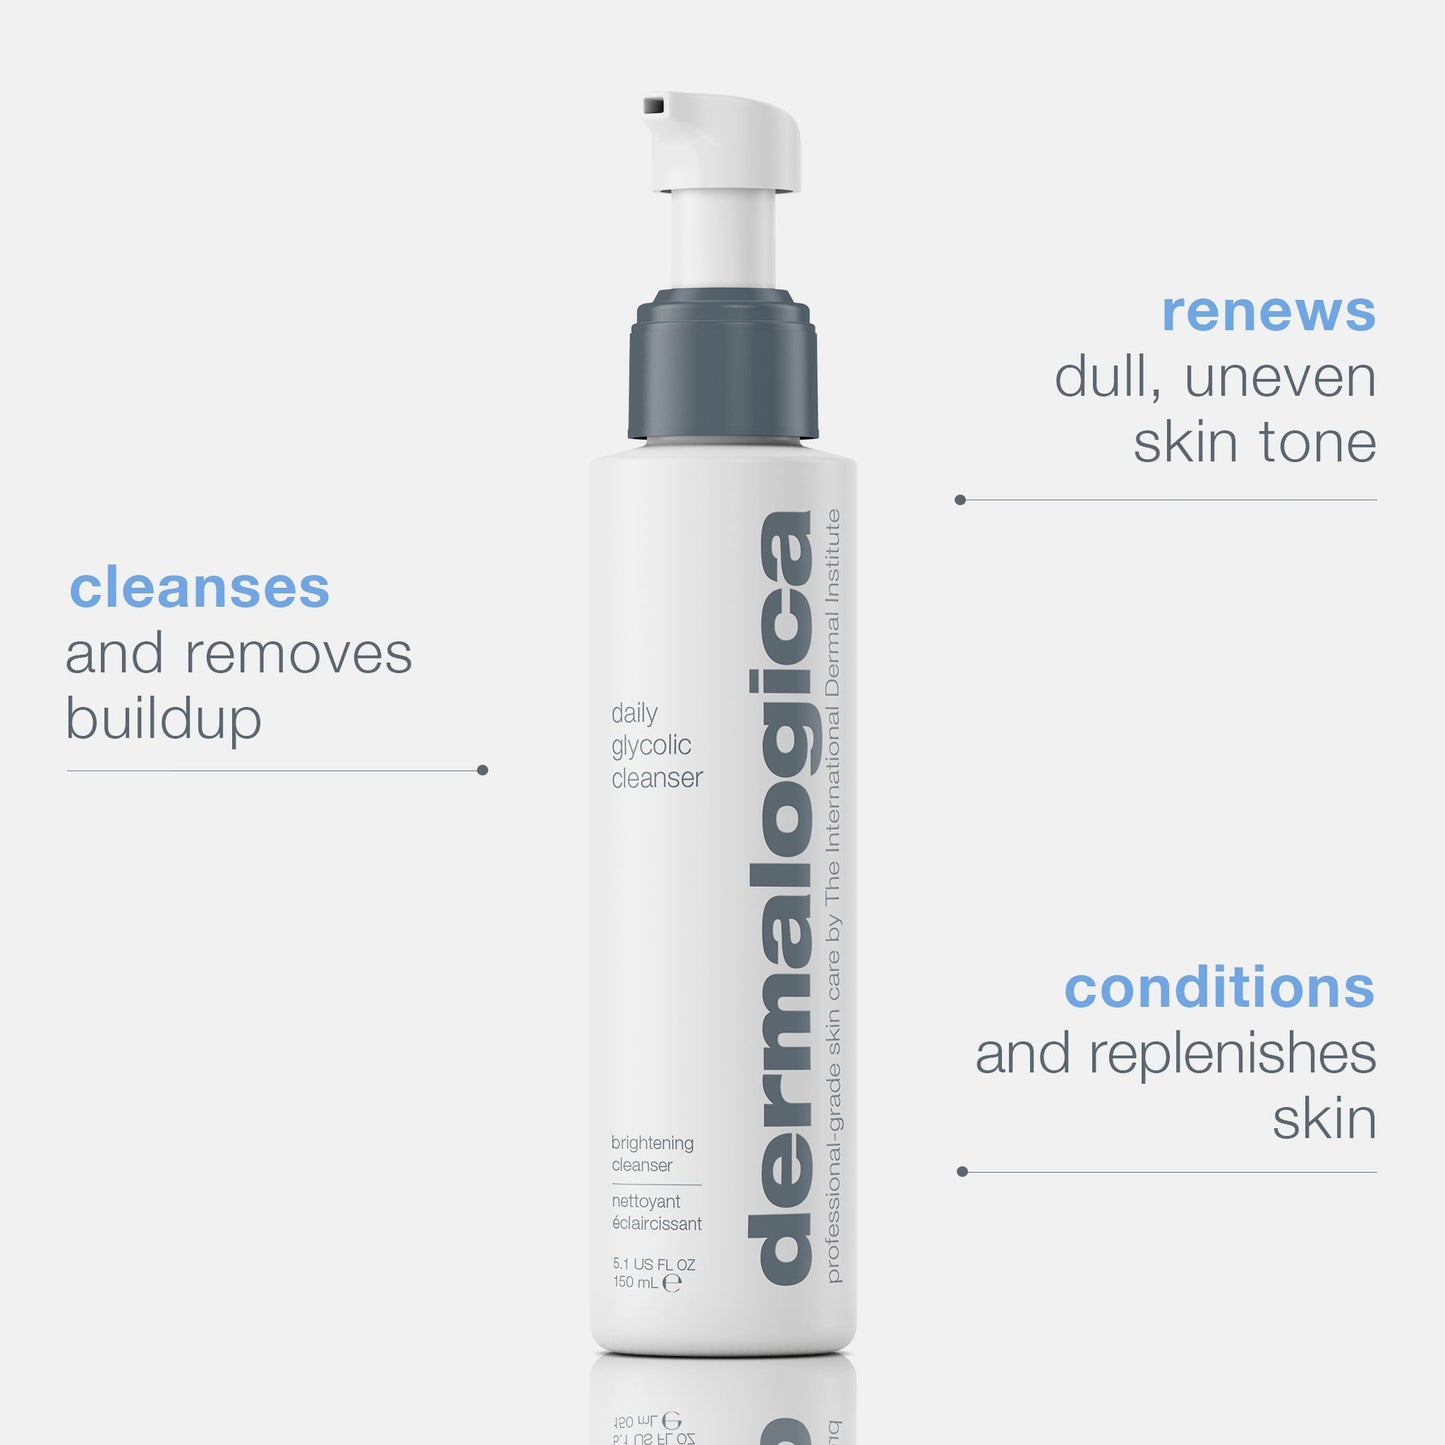 daily glycolic cleanser 5.1 oz benefits